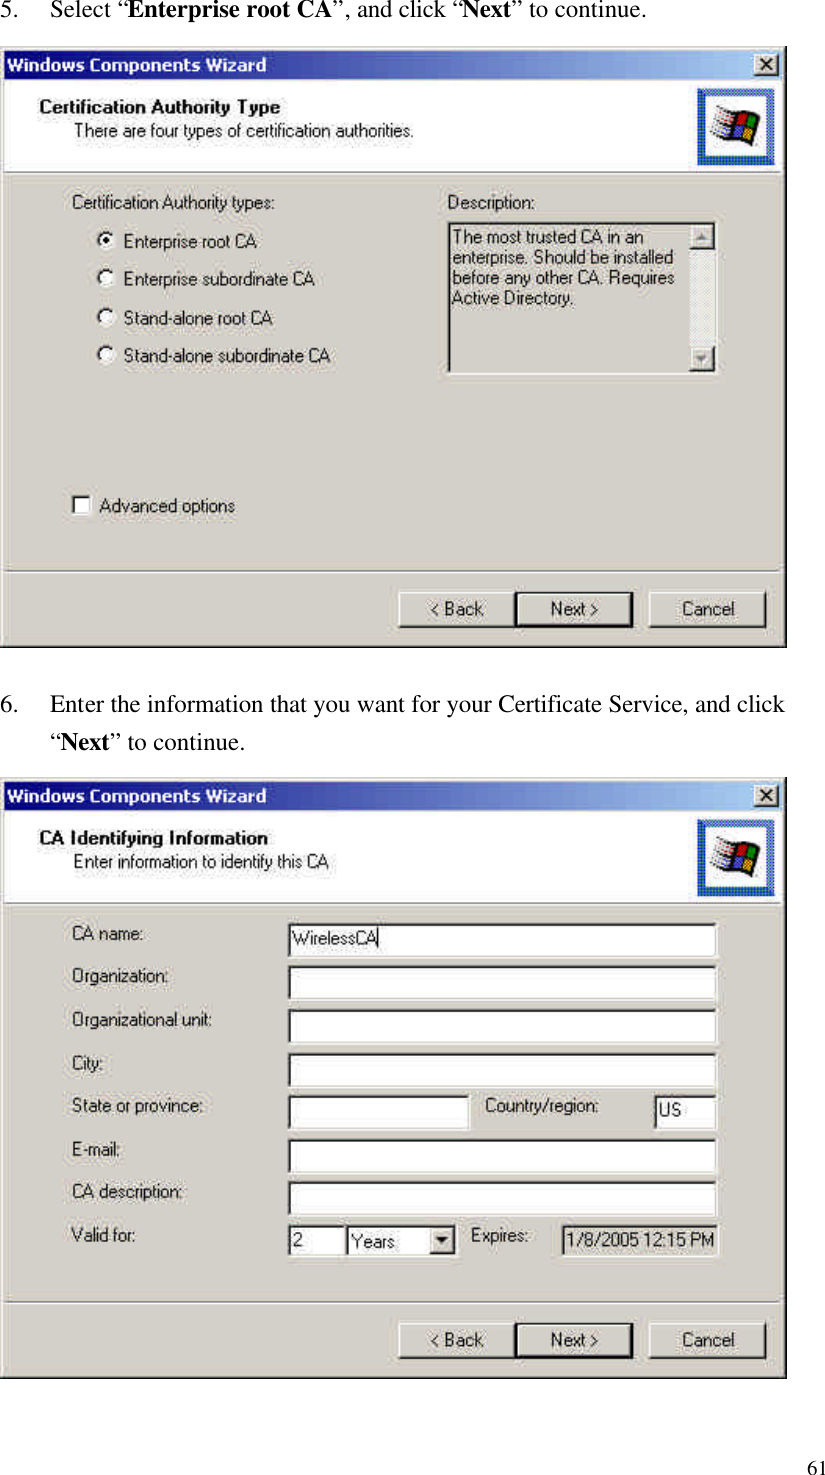  61 5. Select “Enterprise root CA”, and click “Next” to continue.  6. Enter the information that you want for your Certificate Service, and click “Next” to continue. 